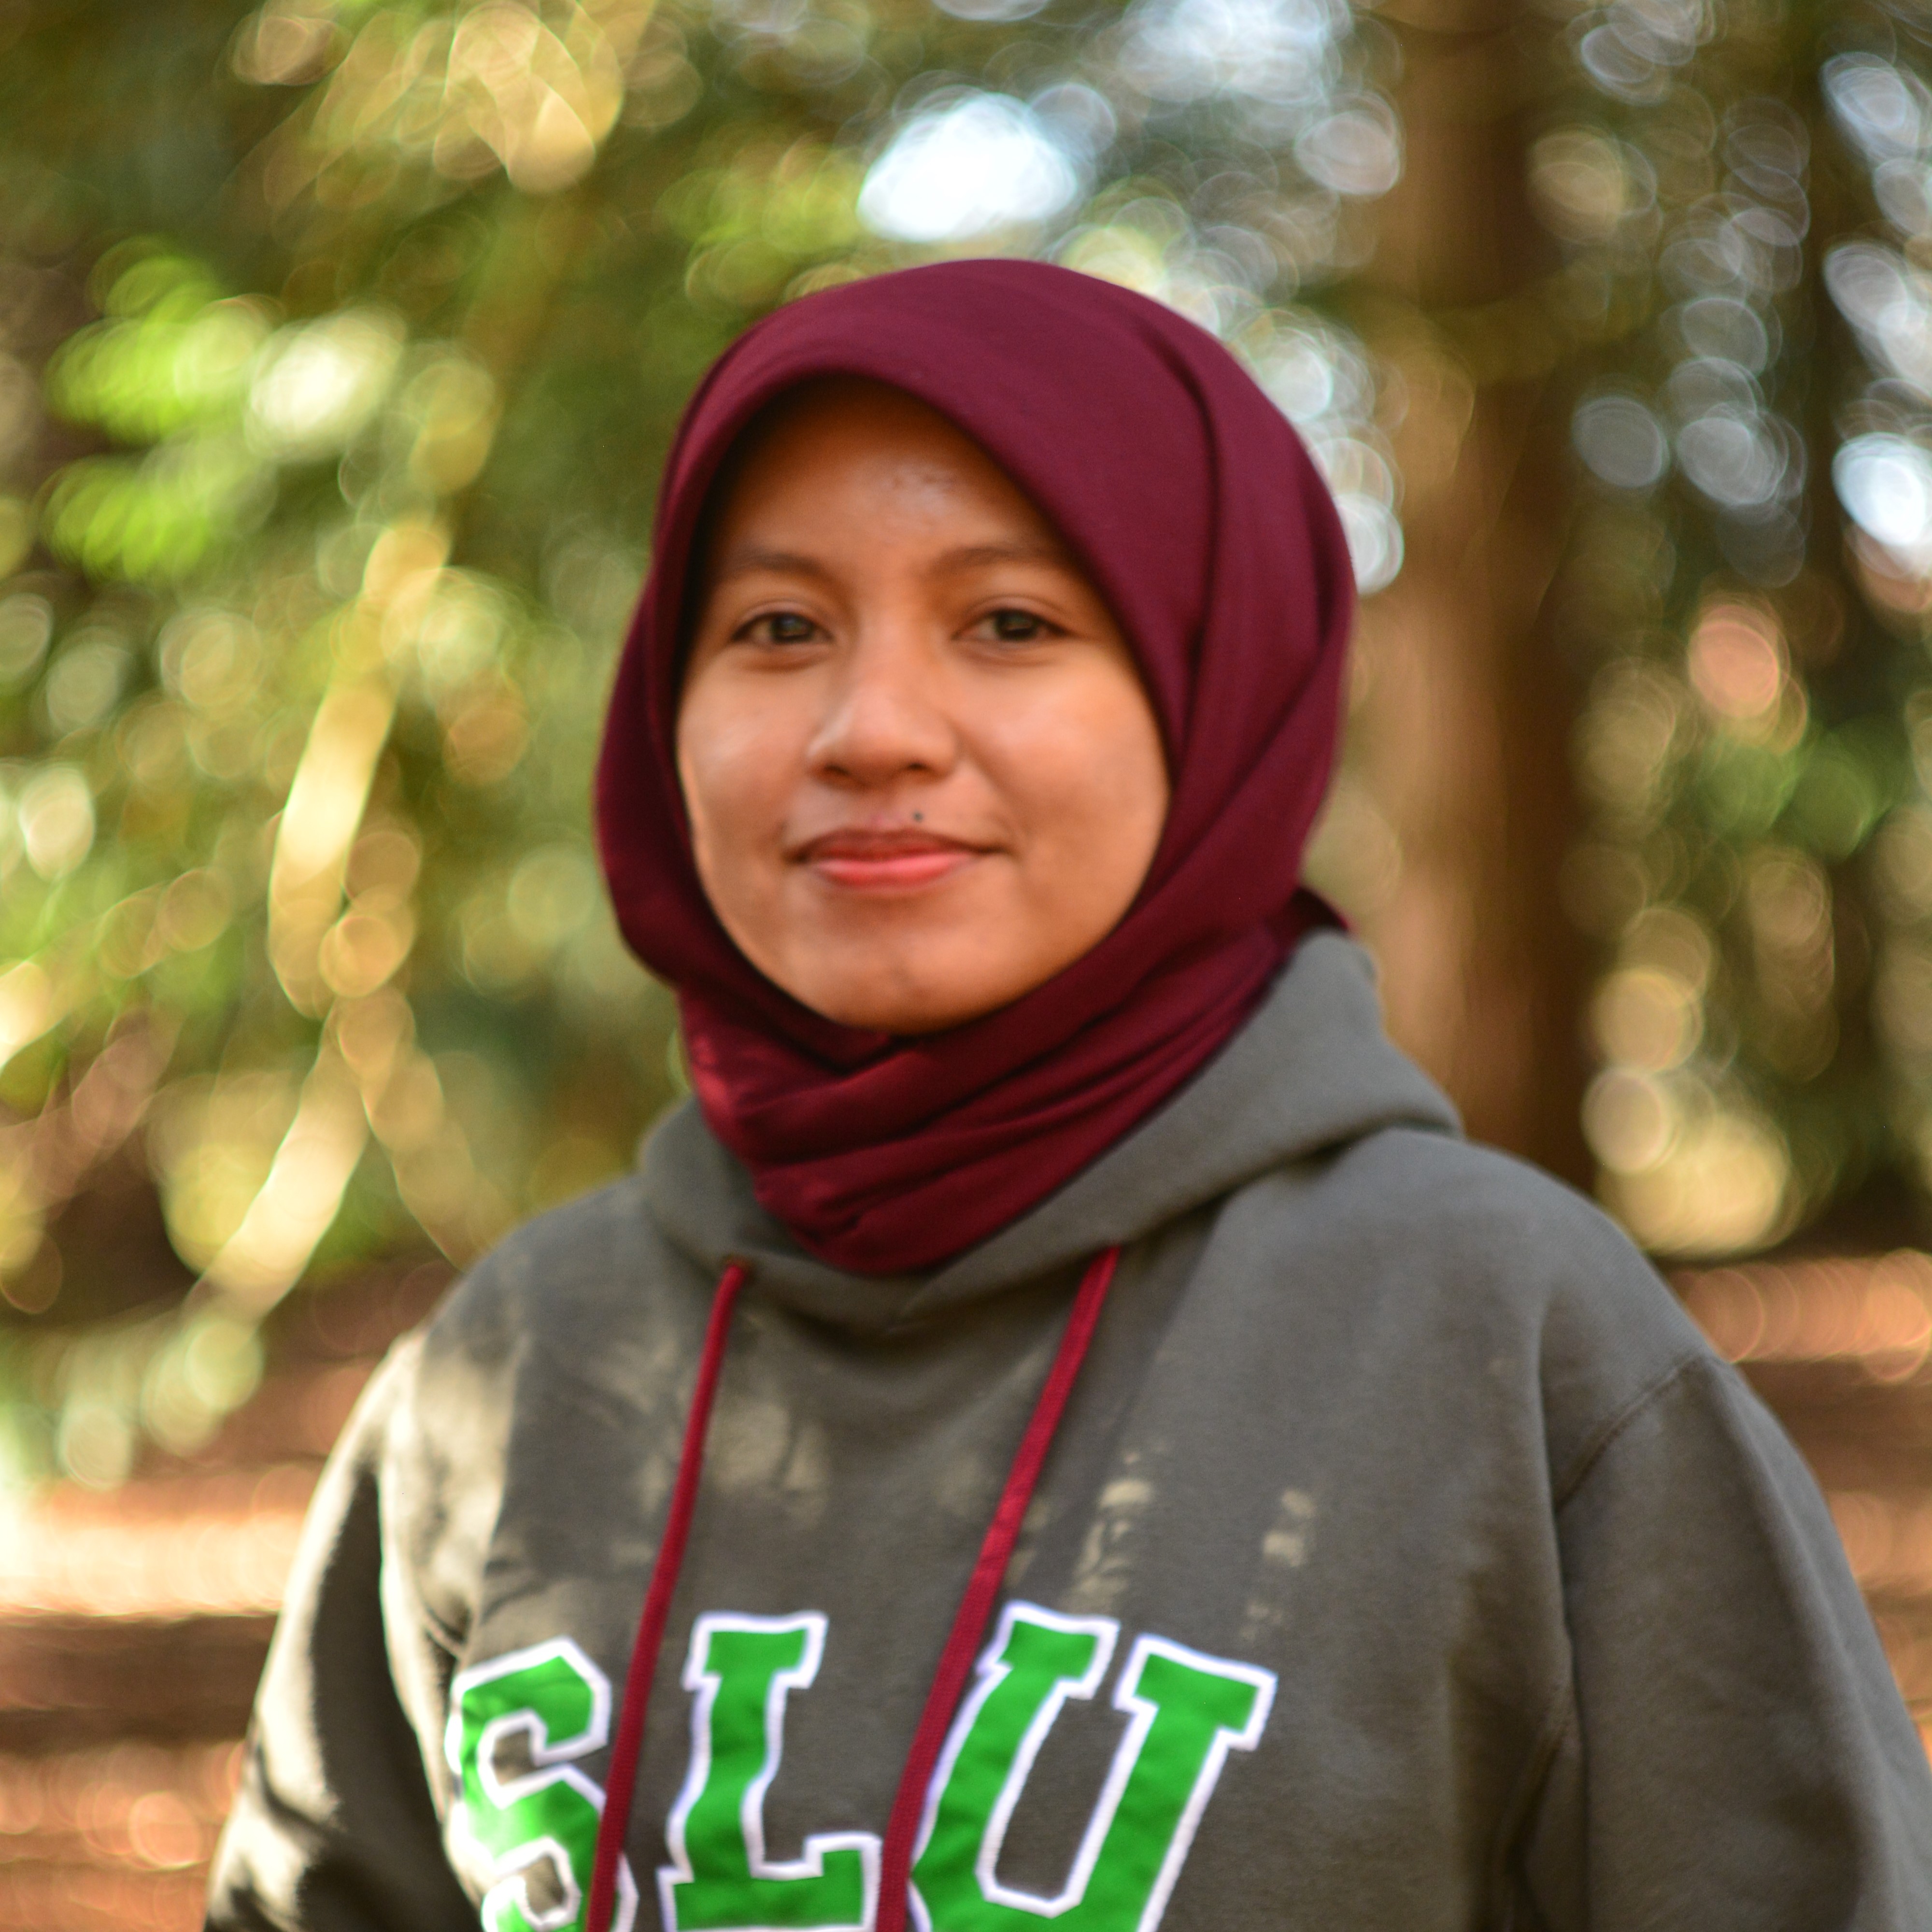 An image of a woman wearing a sweater with the text "SLU". Outdoors.